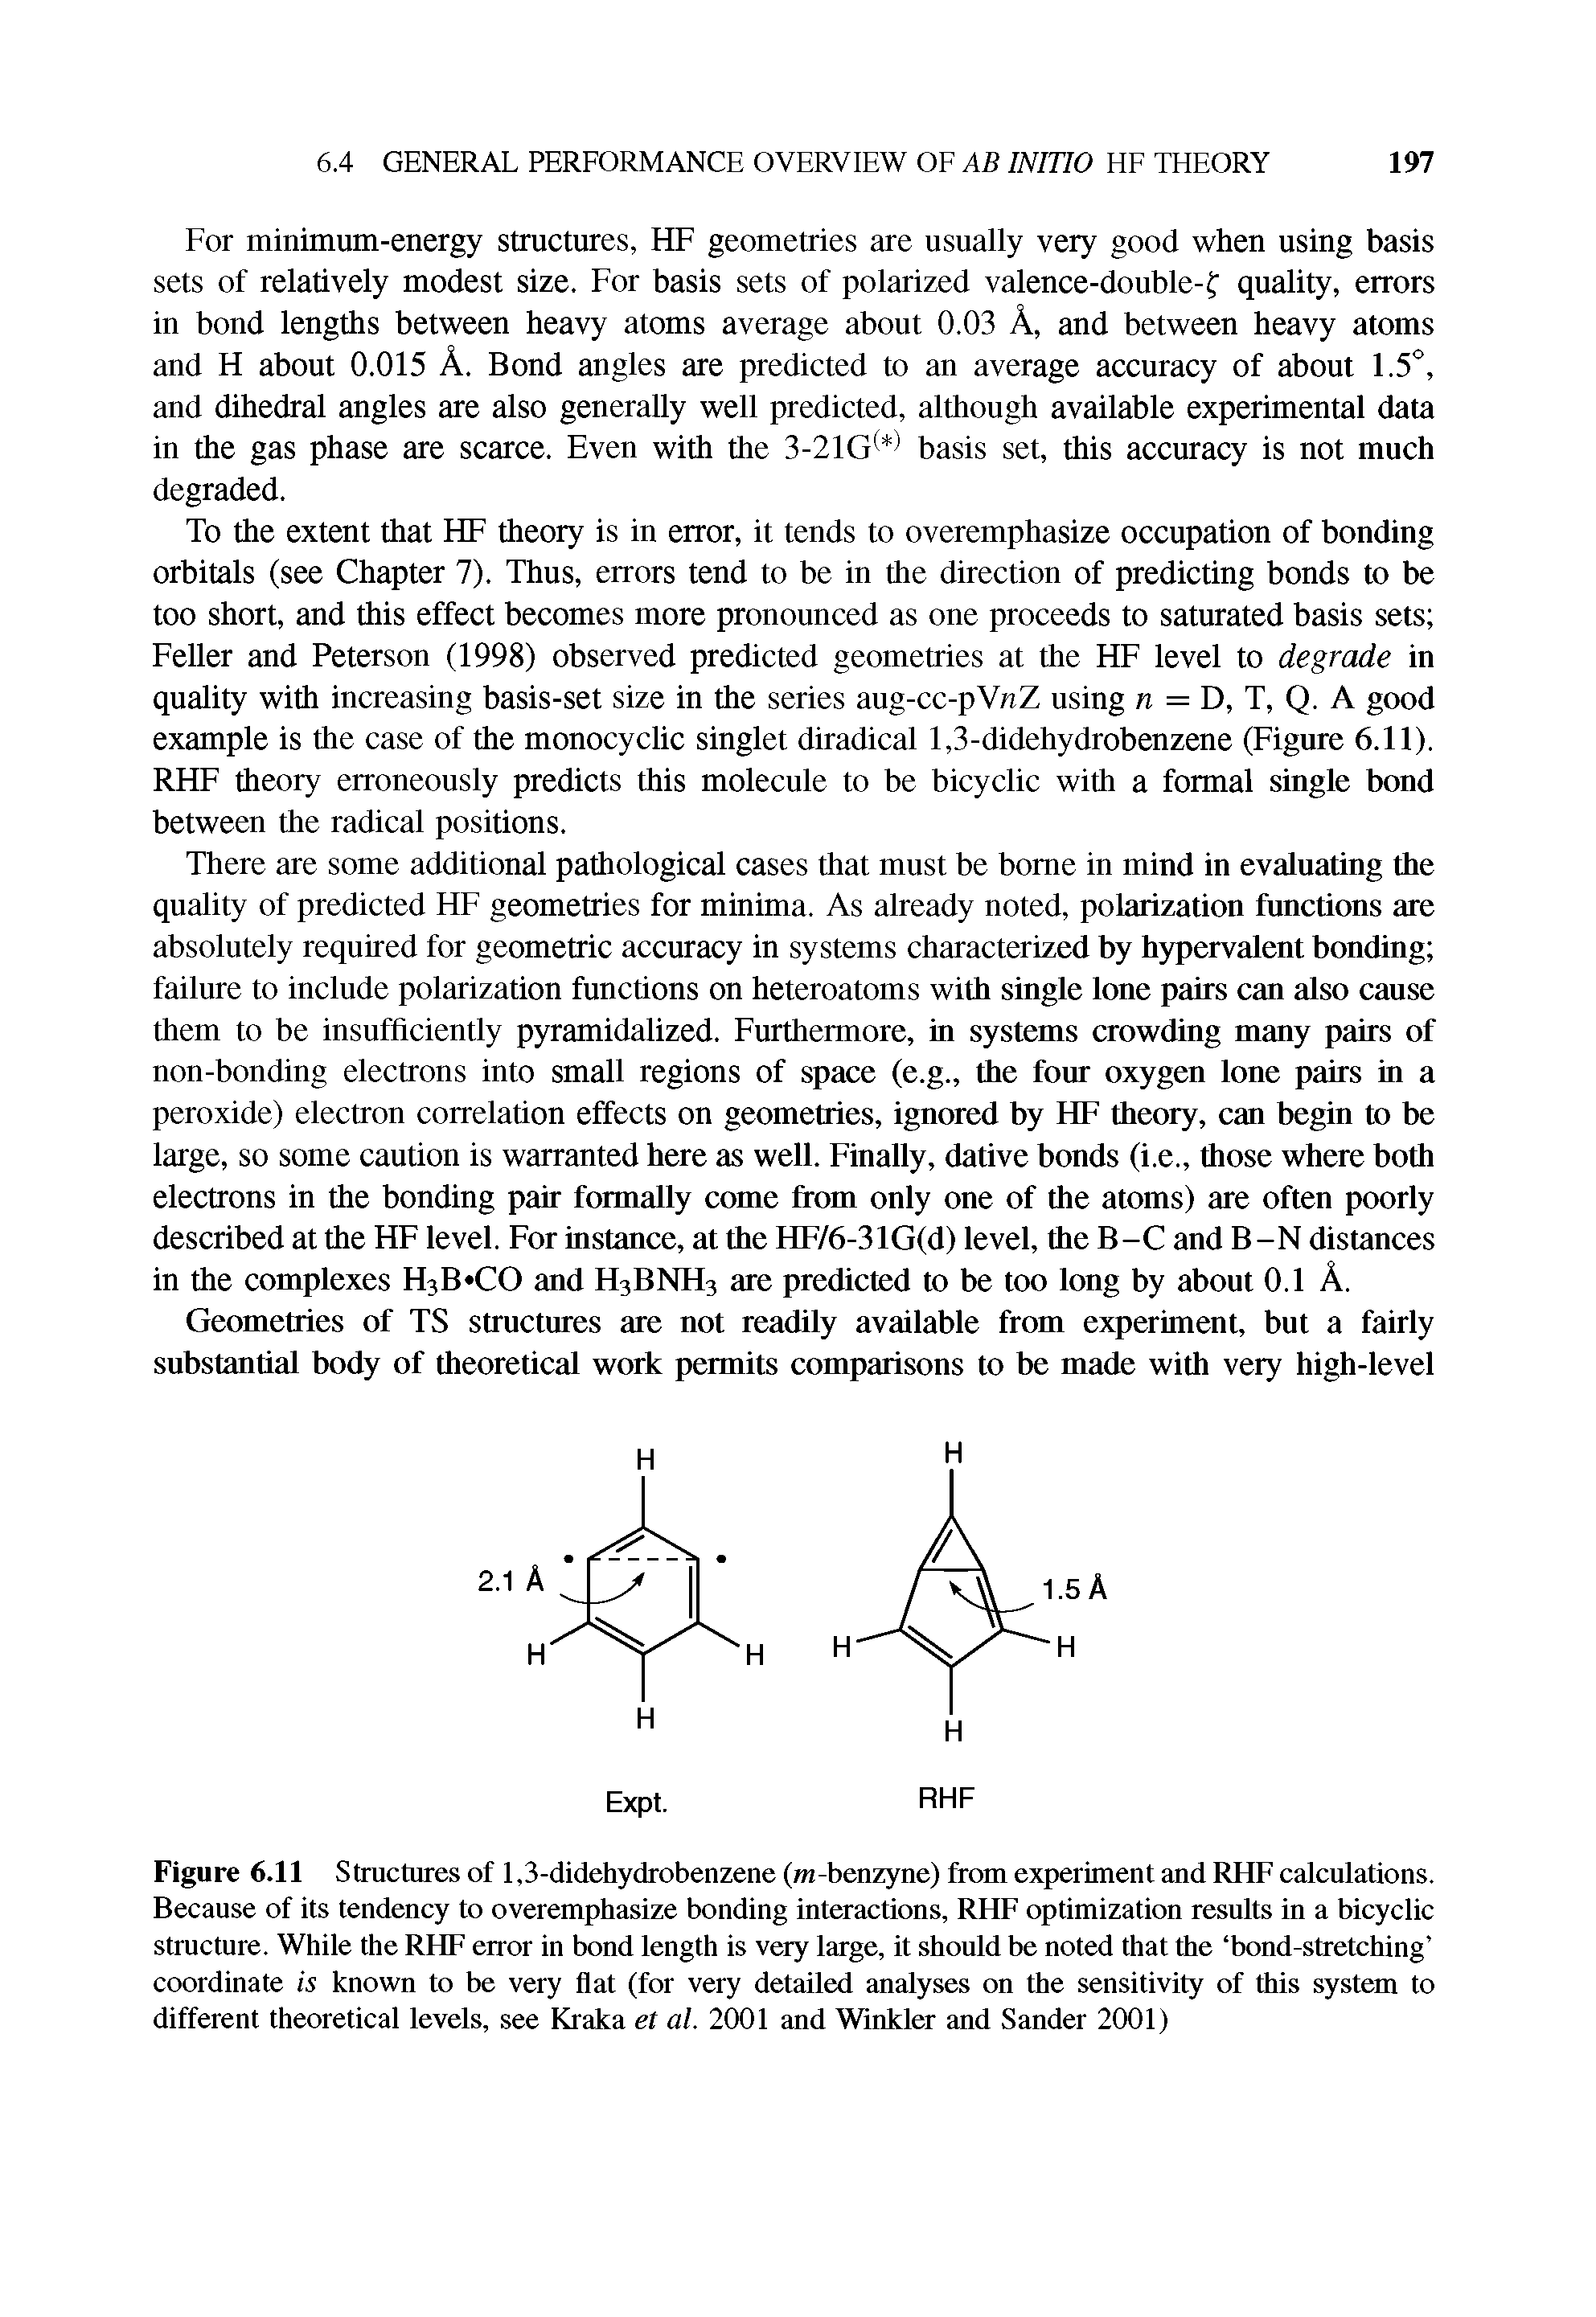 Figure 6.11 Structures of 1,3-didehydrobenzene (m-benzyne) from experiment and RHF calculations. Because of its tendency to overemphasize bonding interactions, RHF optimization results in a bicyclic structure. While the RHF error in bond length is very large, it should be noted that the bond-stretching coordinate is known to be very flat (for very detailed analyses on the sensitivity of this system to different theoretical levels, see Kraka et al. 2001 and Winkler and Sander 2001)...